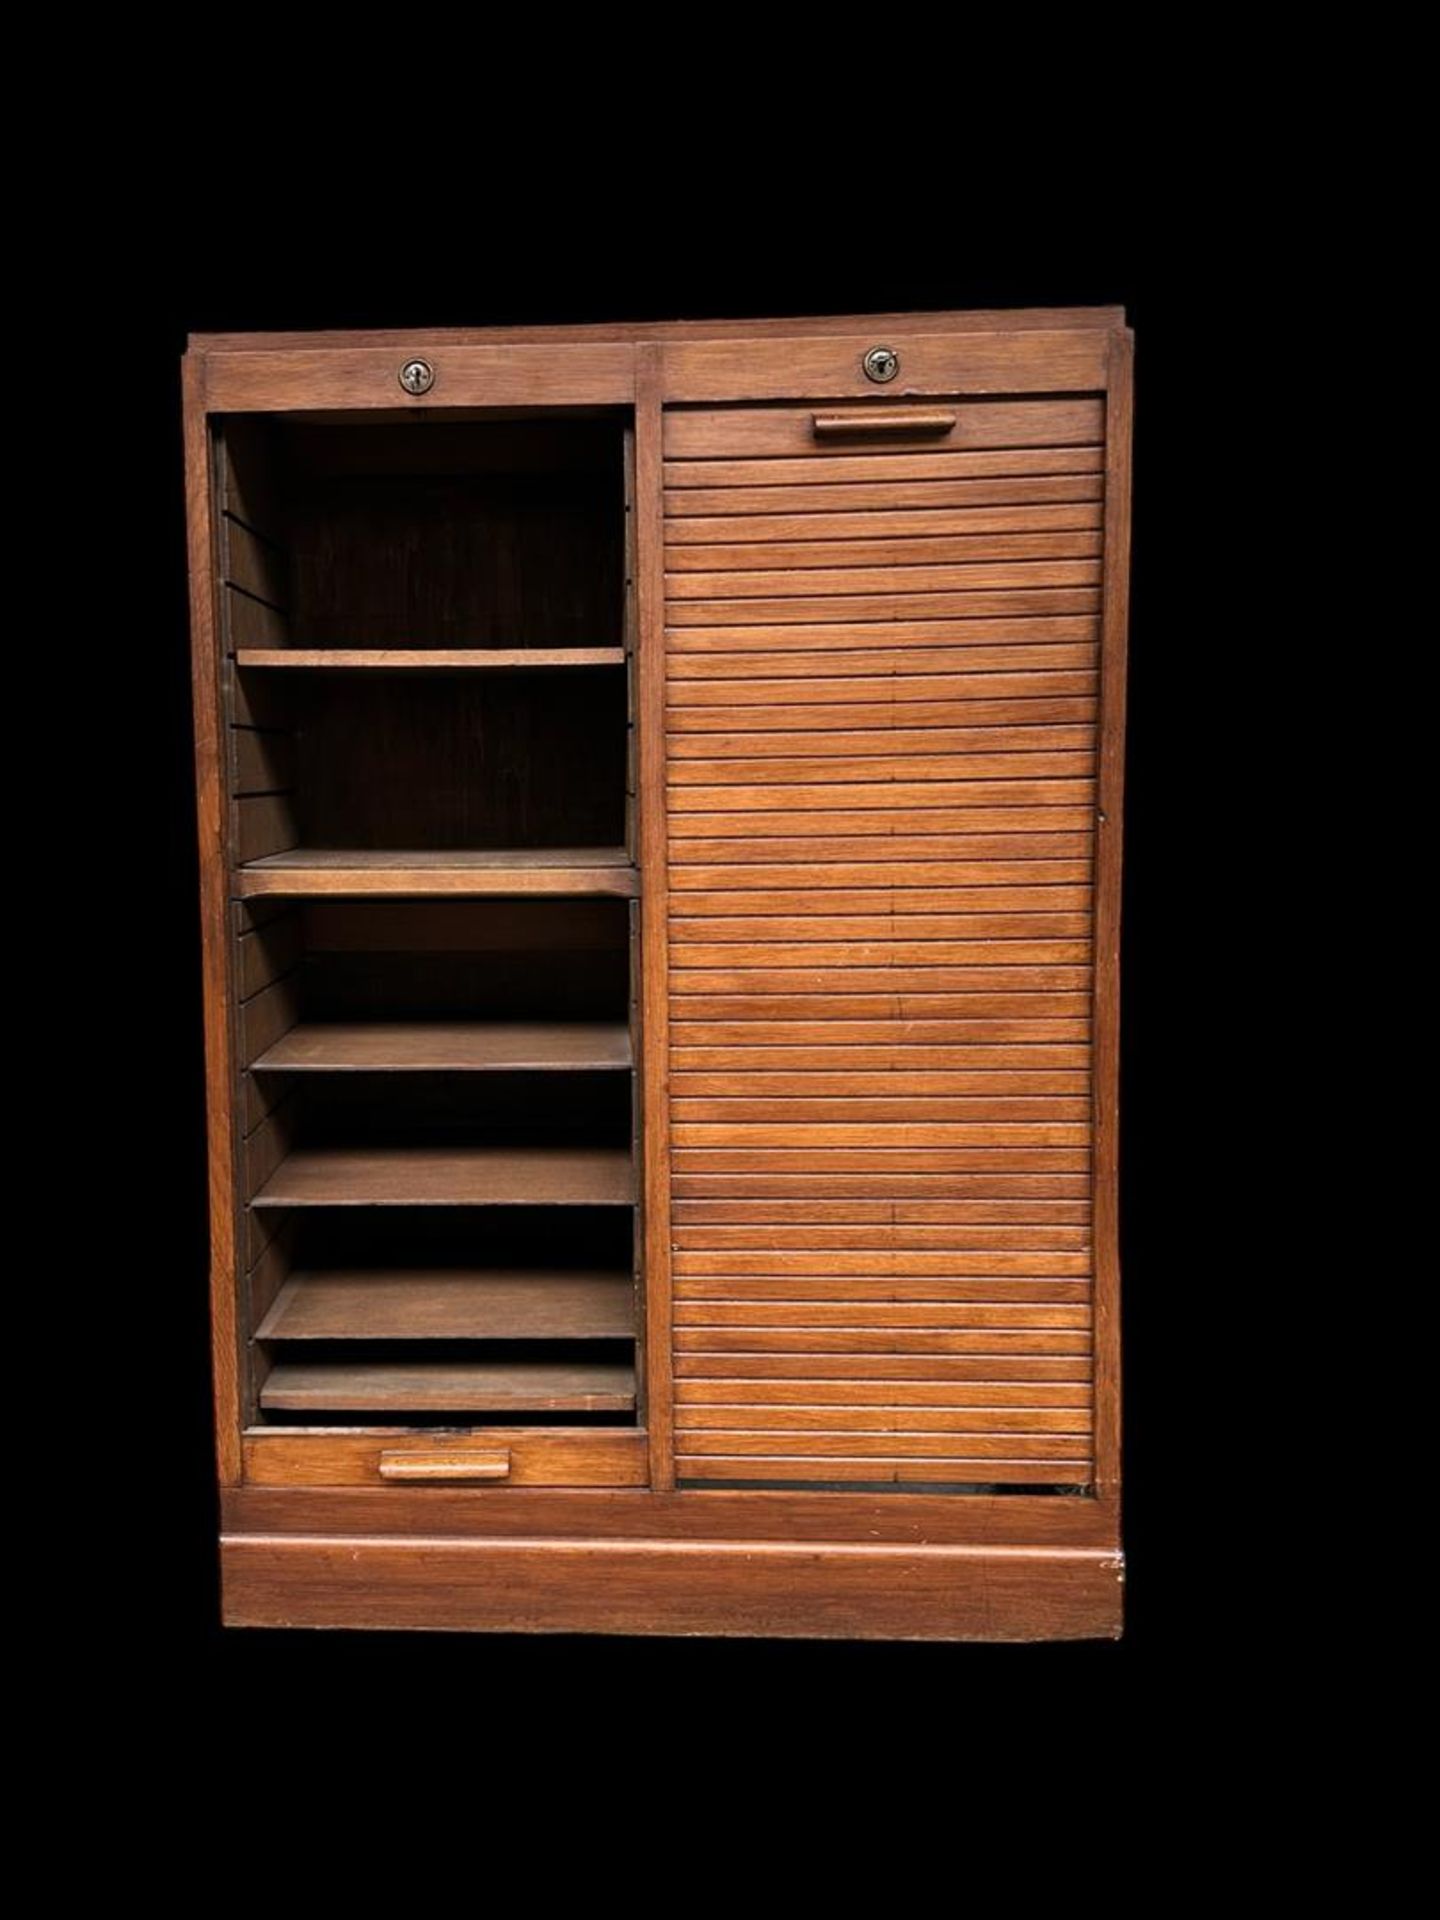 An oak filing cabinet with roller doors, ca. 1930.
120 x 34 x 82 cm. - Image 2 of 2